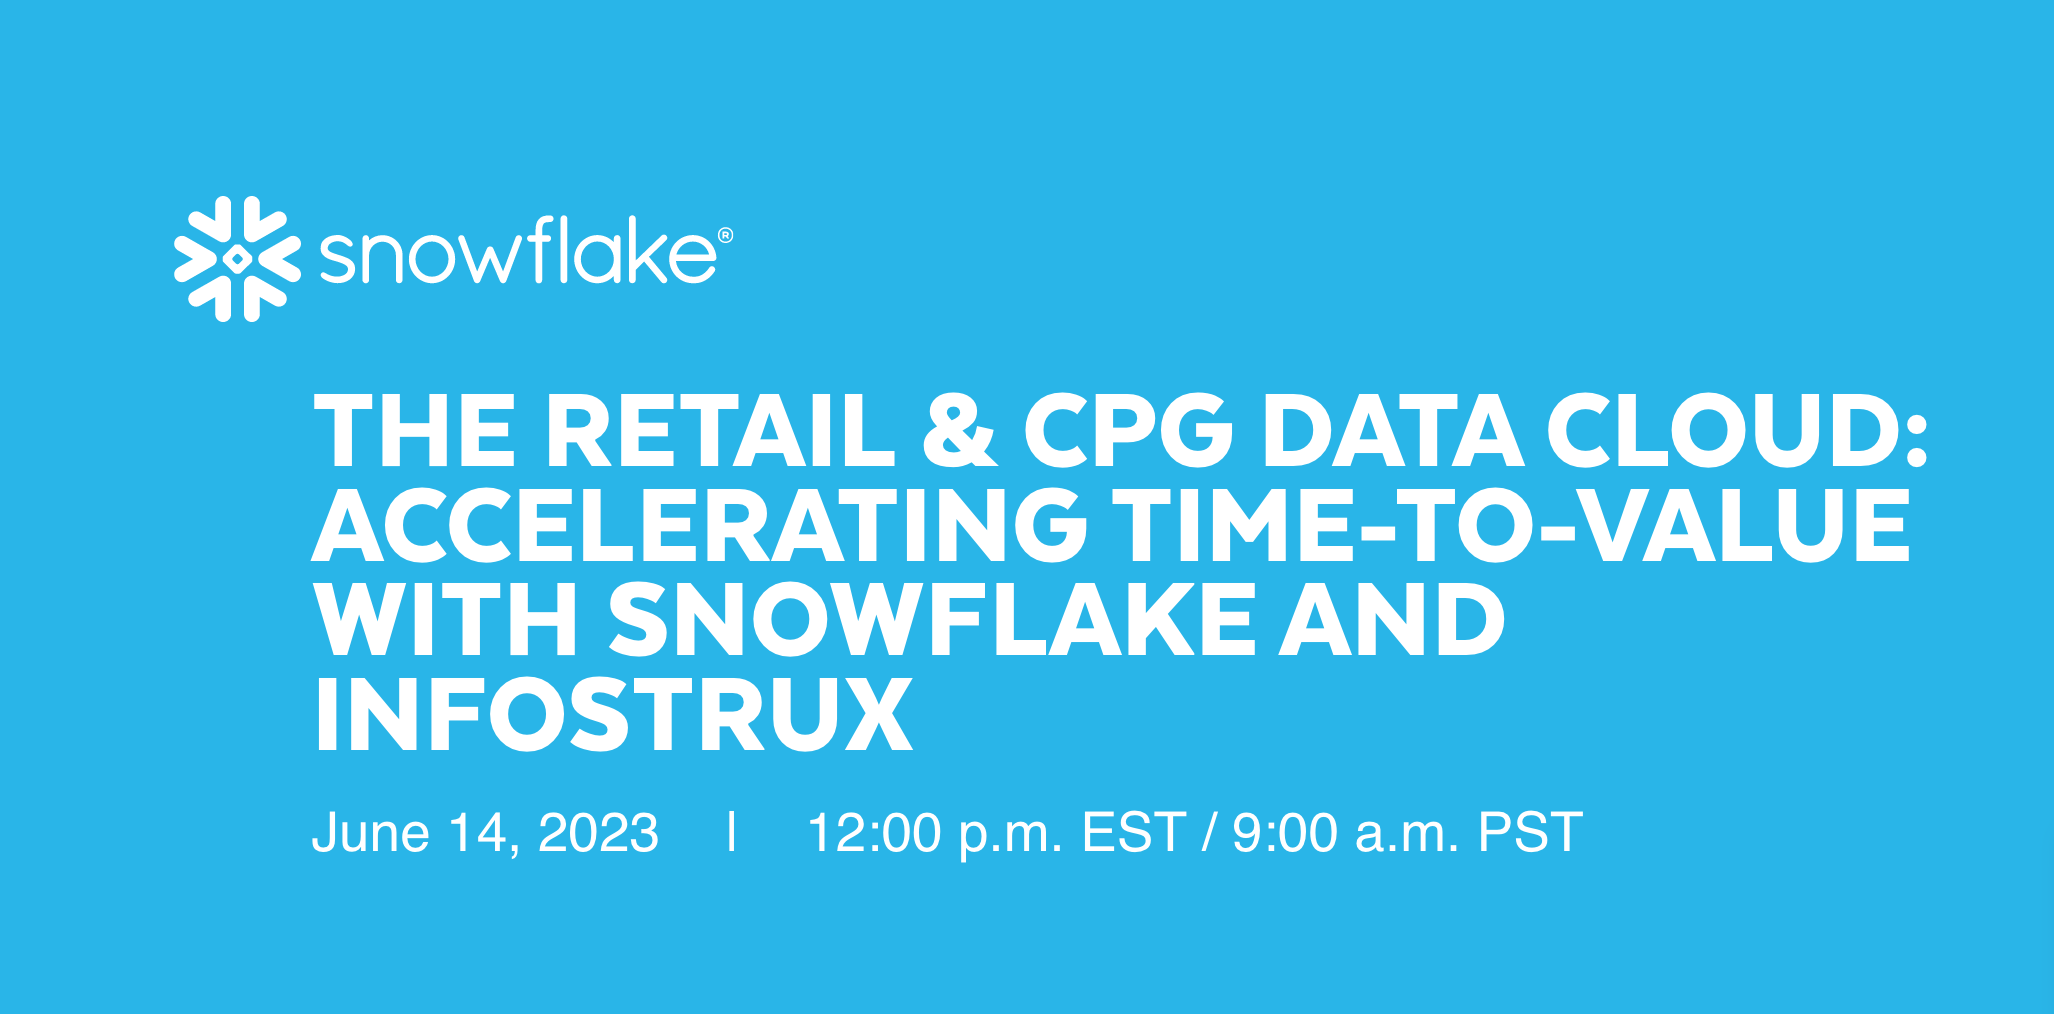 The Retail & CPG Data Cloud Accelerating Time-to-value With Snowflake and Infostrux 1